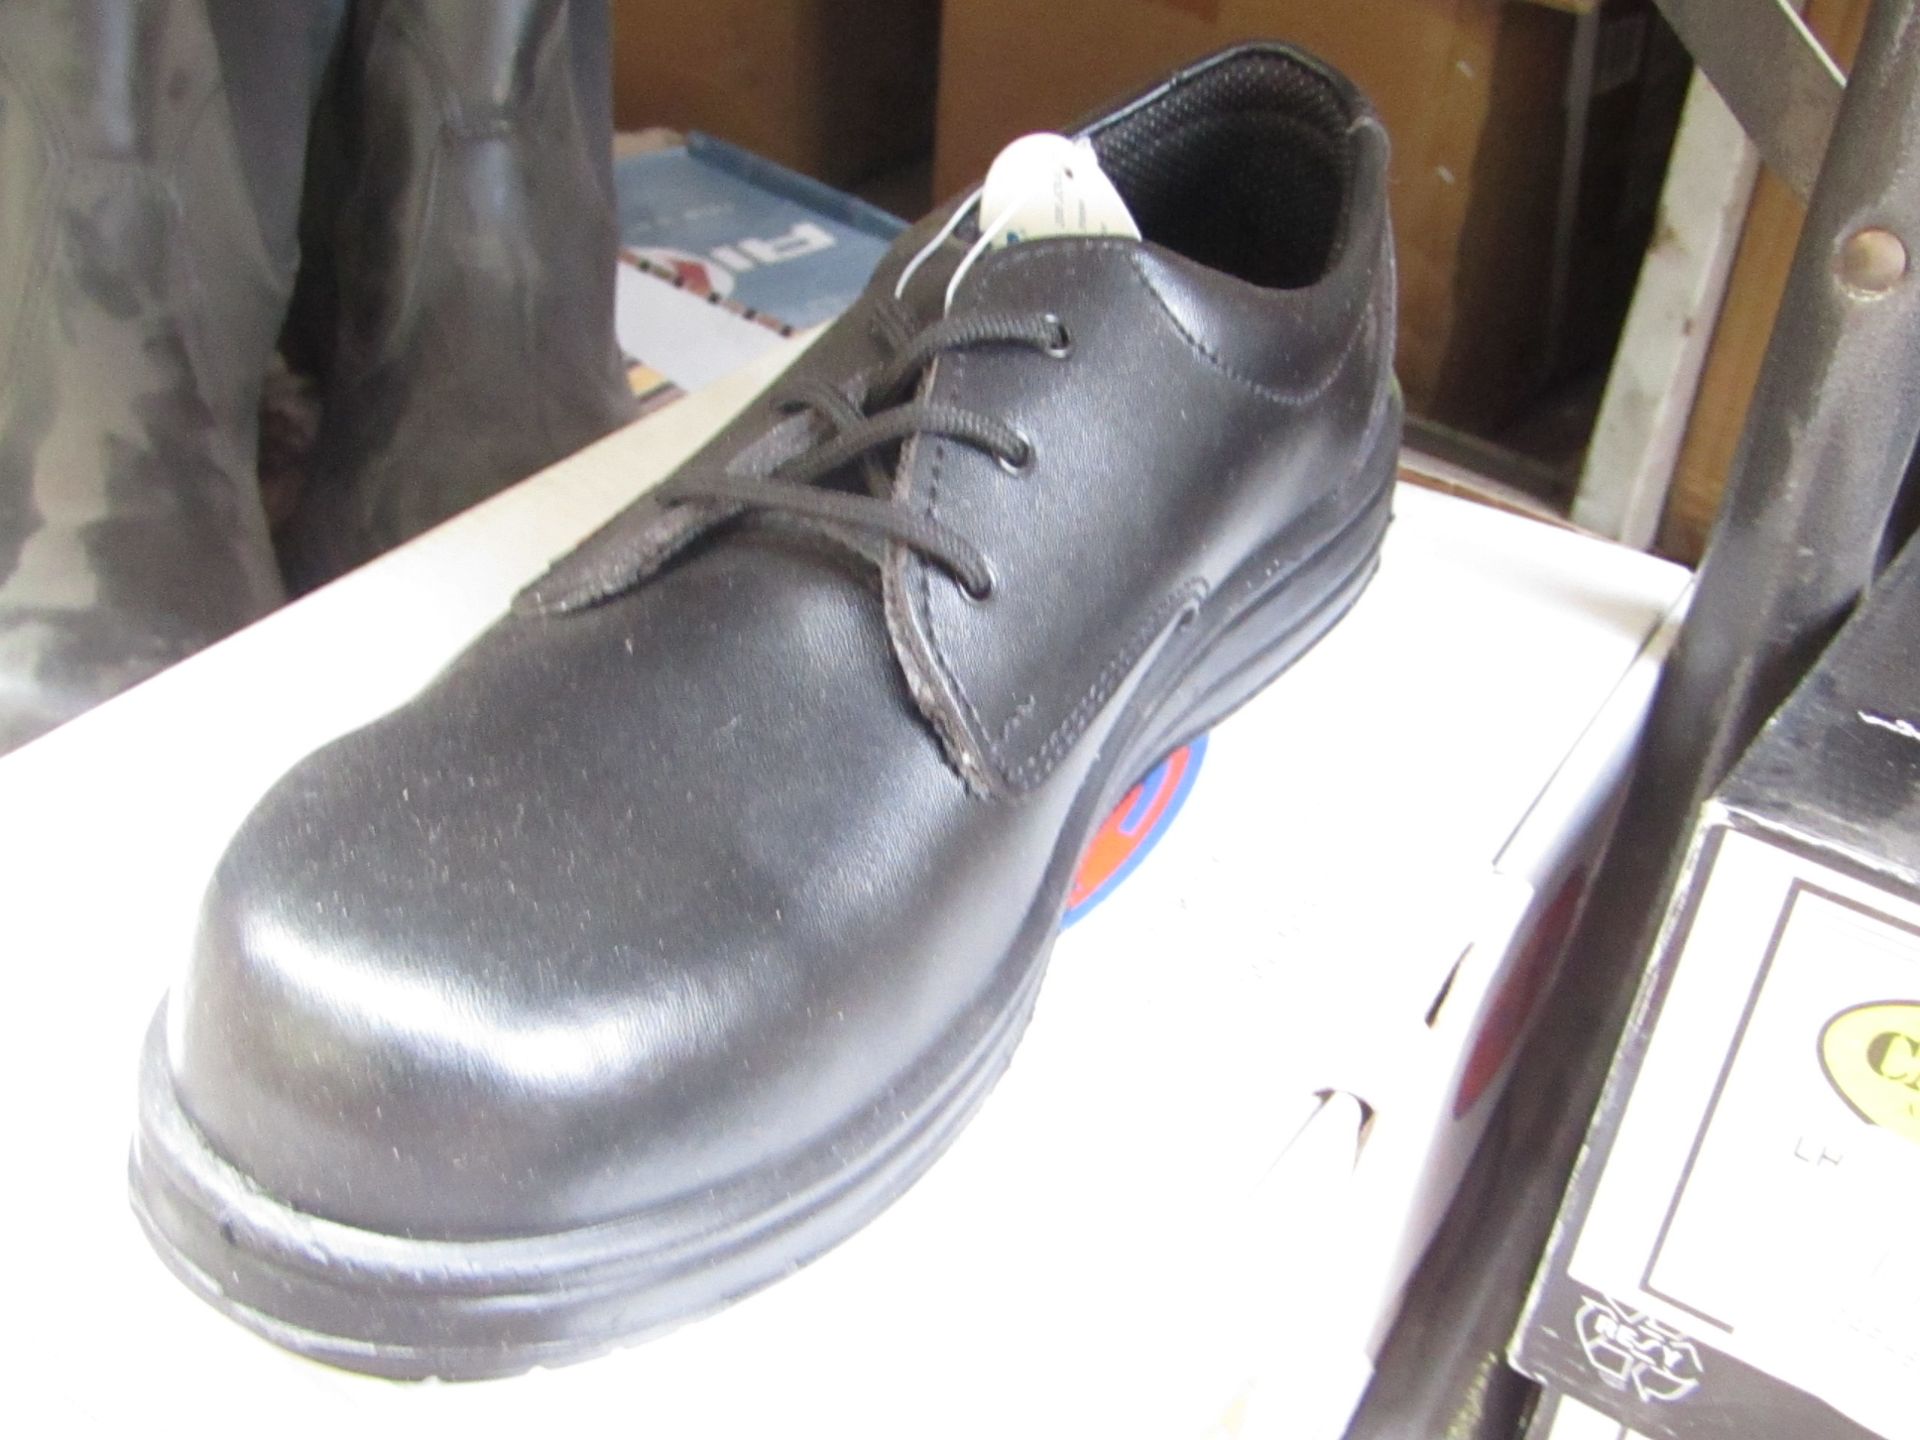 ABS steel toe cap laced shoes, size 3 new and boxed.